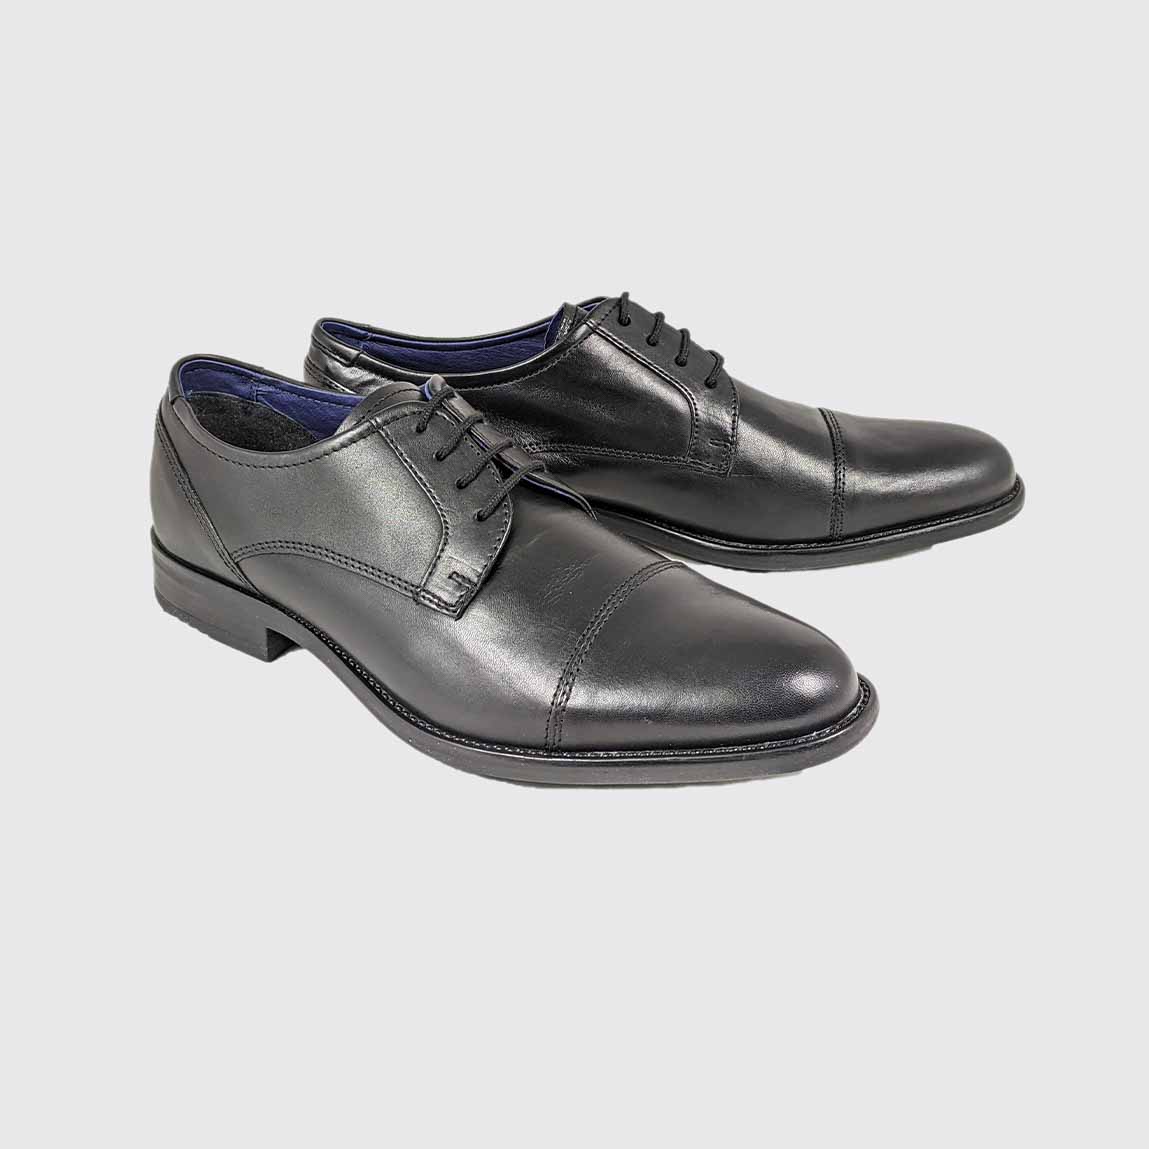 Angled view of the Dubarry Derek Black dress shoe with toe cap.